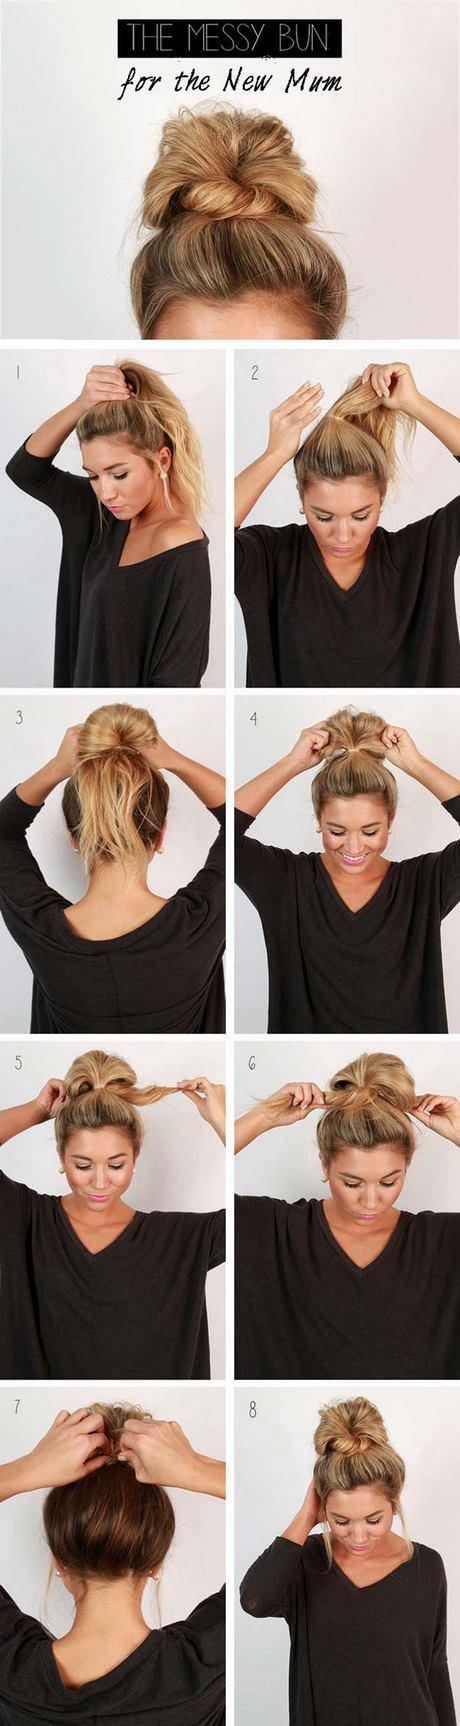 Quick easy pretty hairstyles quick-easy-pretty-hairstyles-31_11